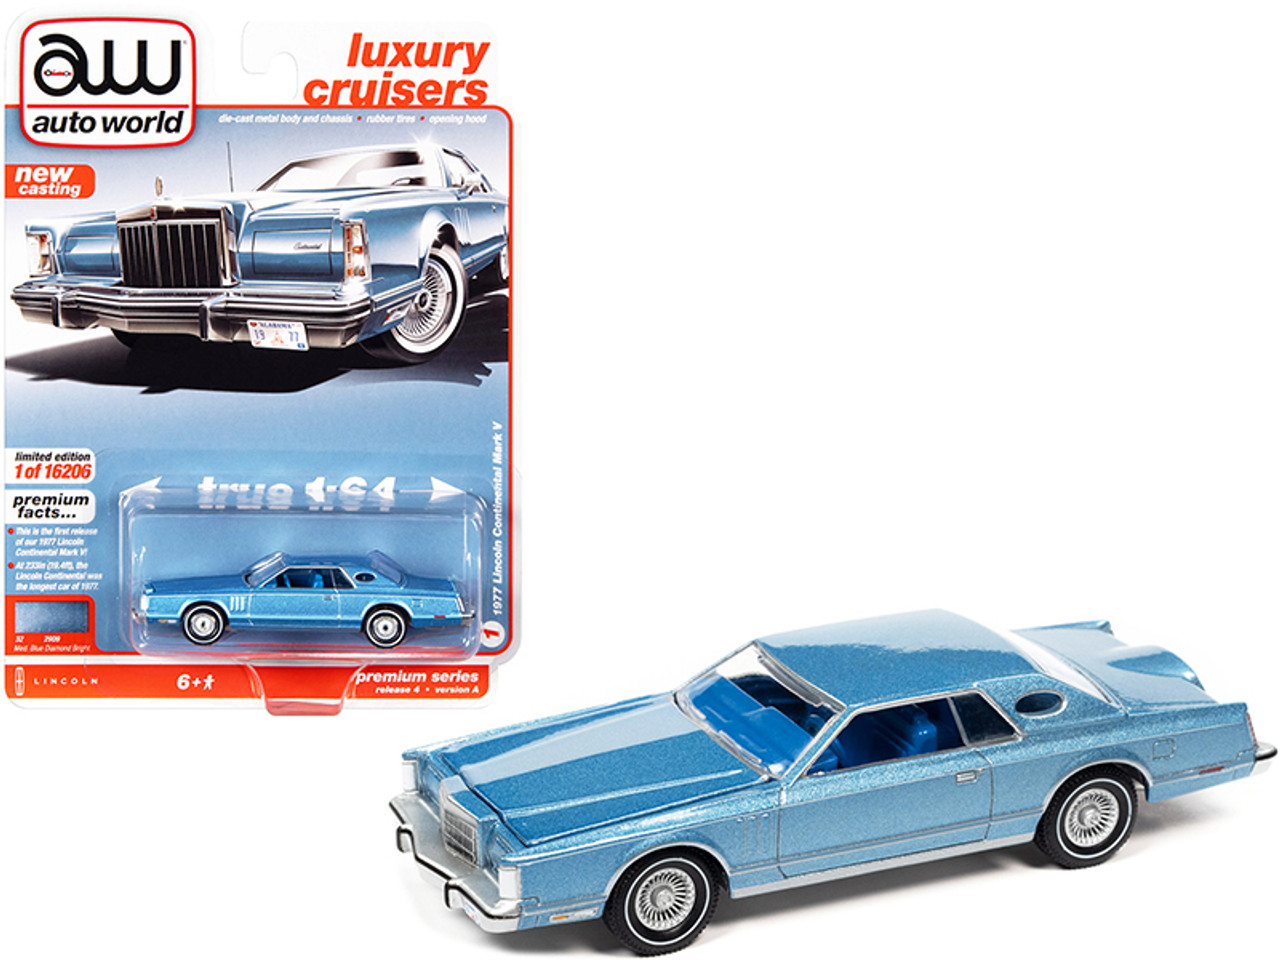 1977 Lincoln Continental Mark V Medium Blue Metallic with Blue Interior "Luxury Cruisers" Limited Edition to 16206 pieces Worldwide 1/64 Diecast Model Car by Autoworld